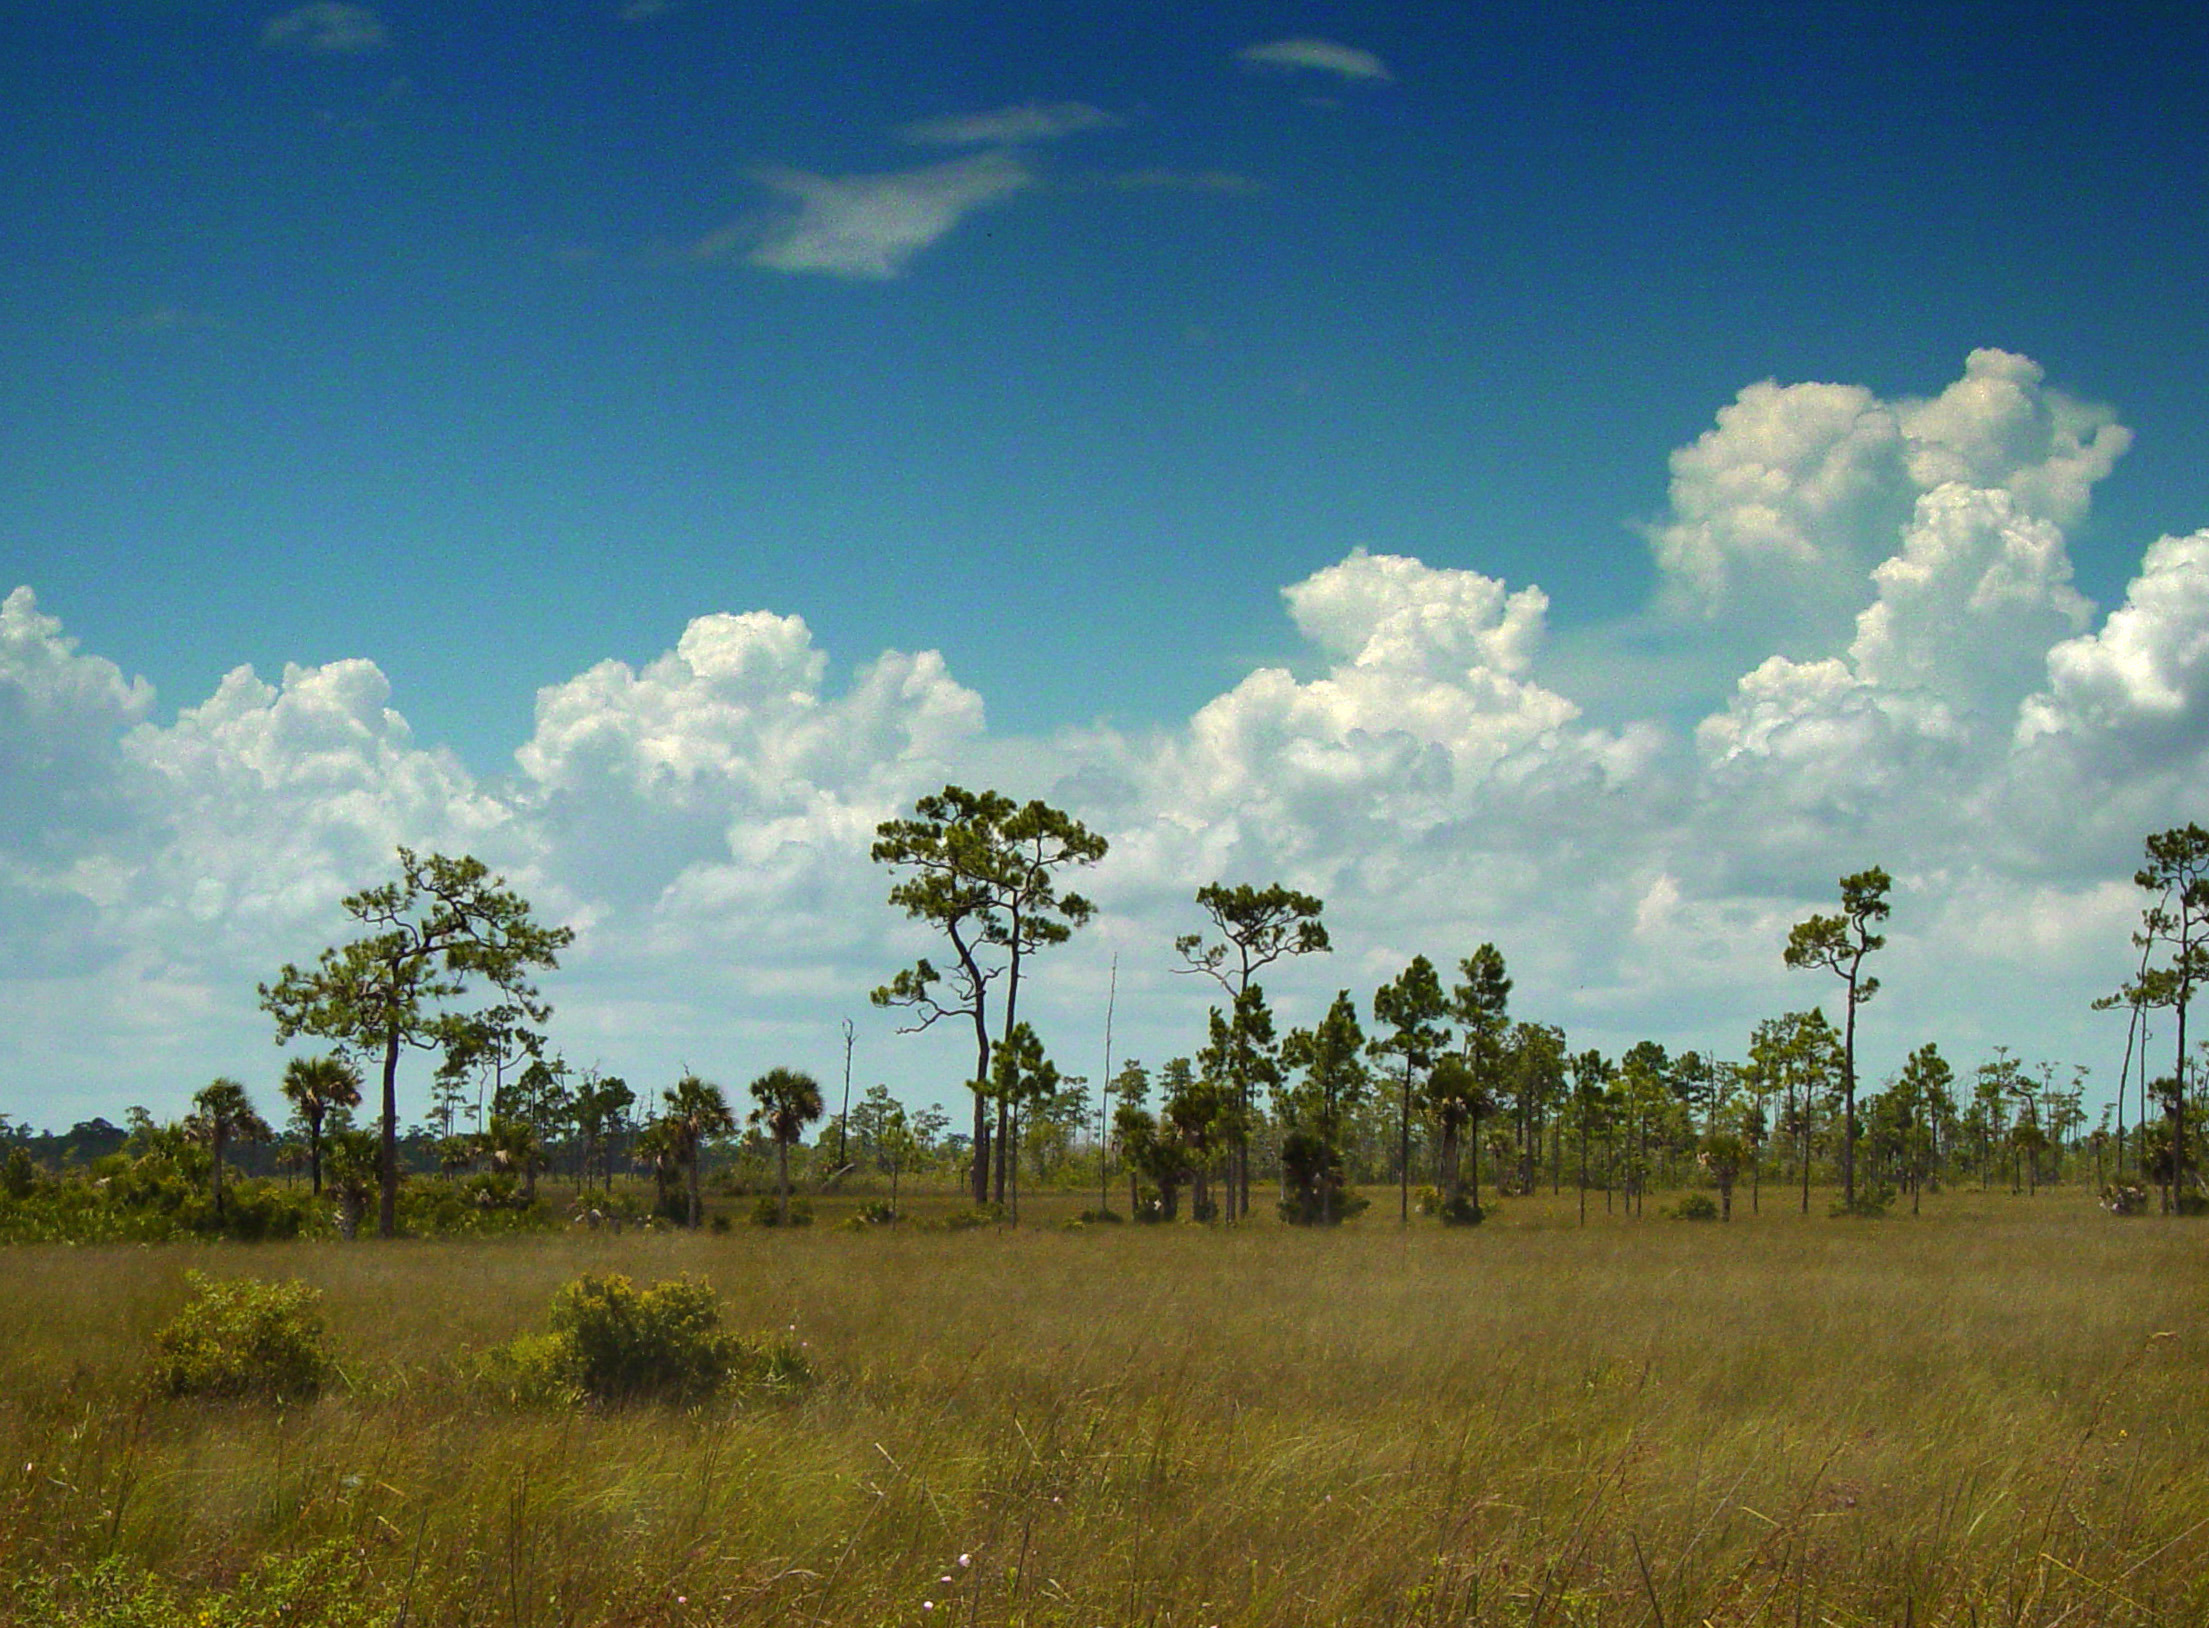 A prairie foreground with tall pine trees in the background. A large blue sky with white cloud